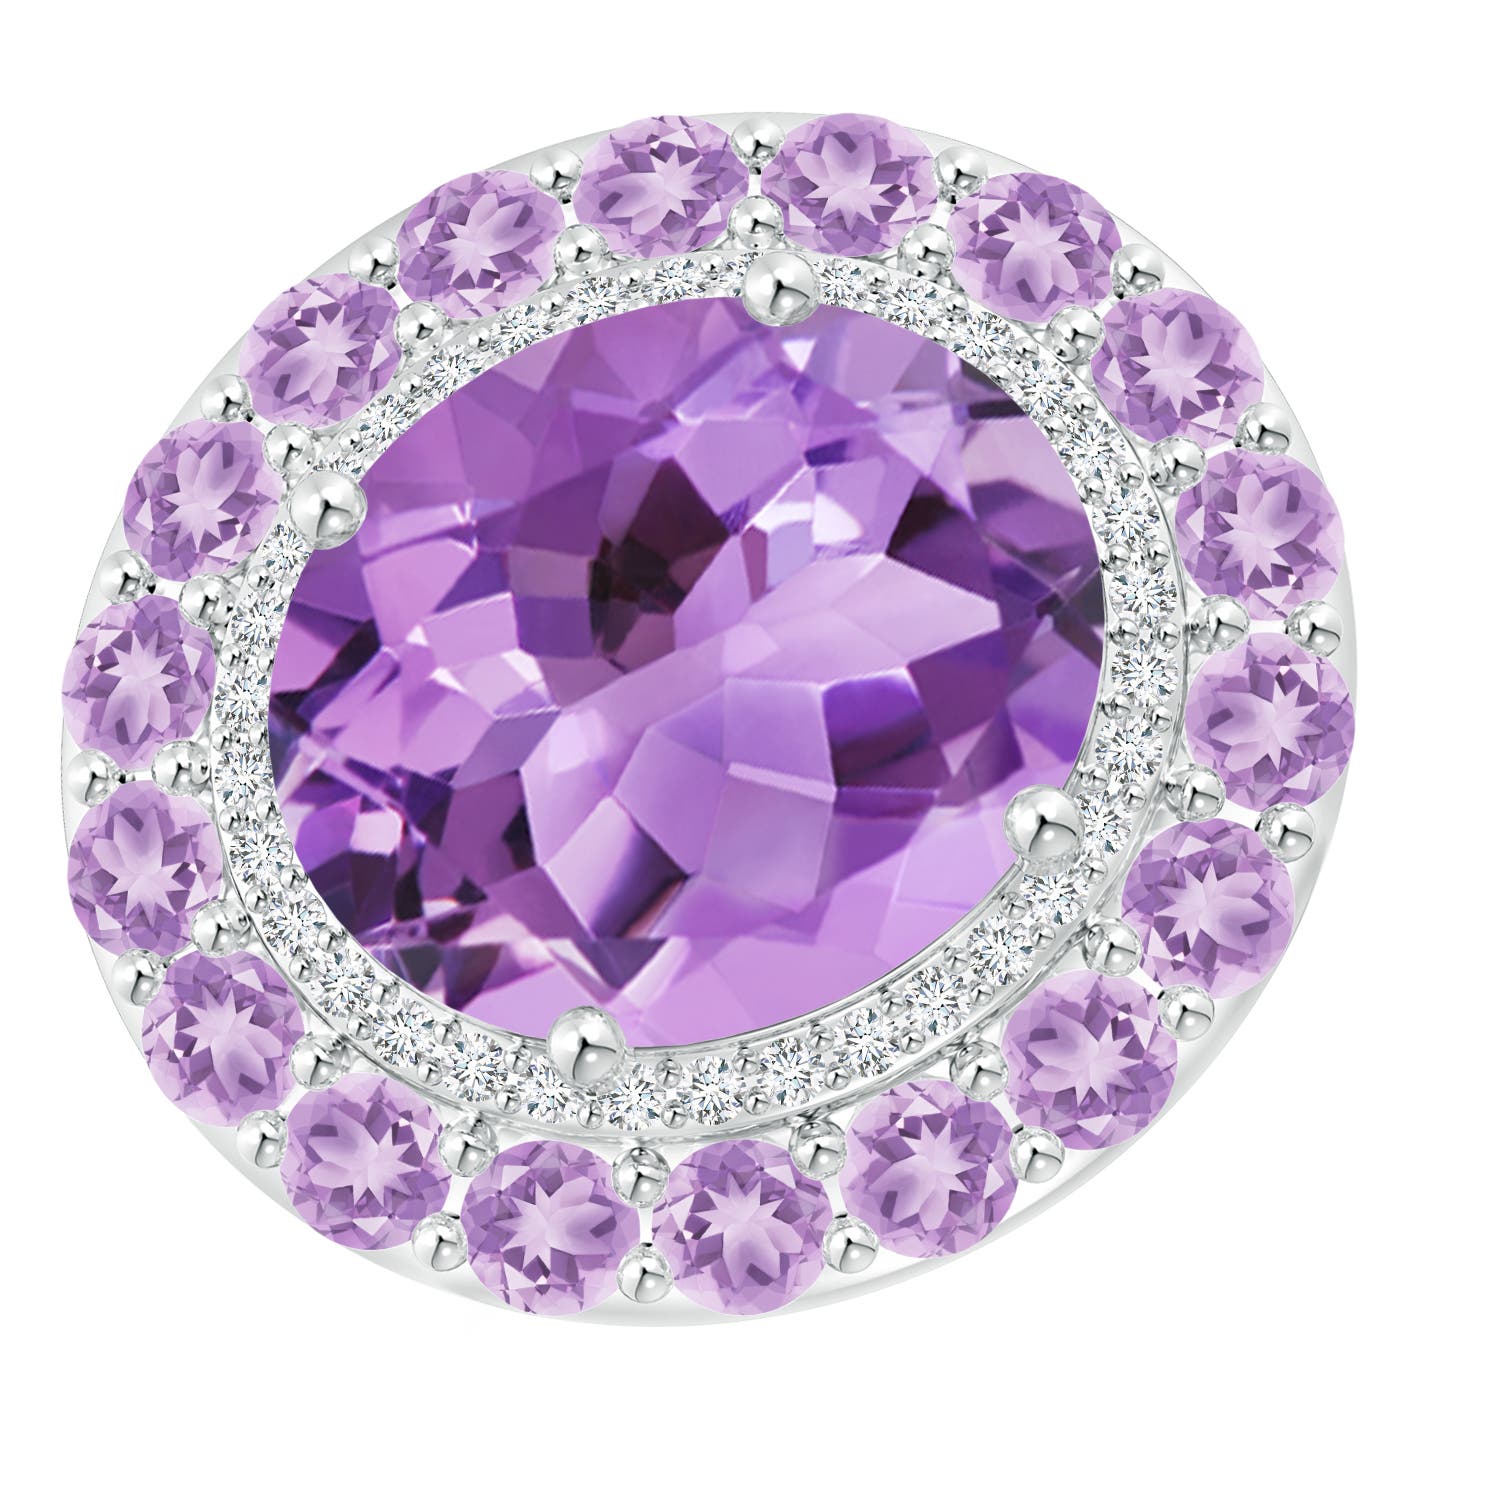 A - Amethyst / 8.52 CT / 14 KT White Gold